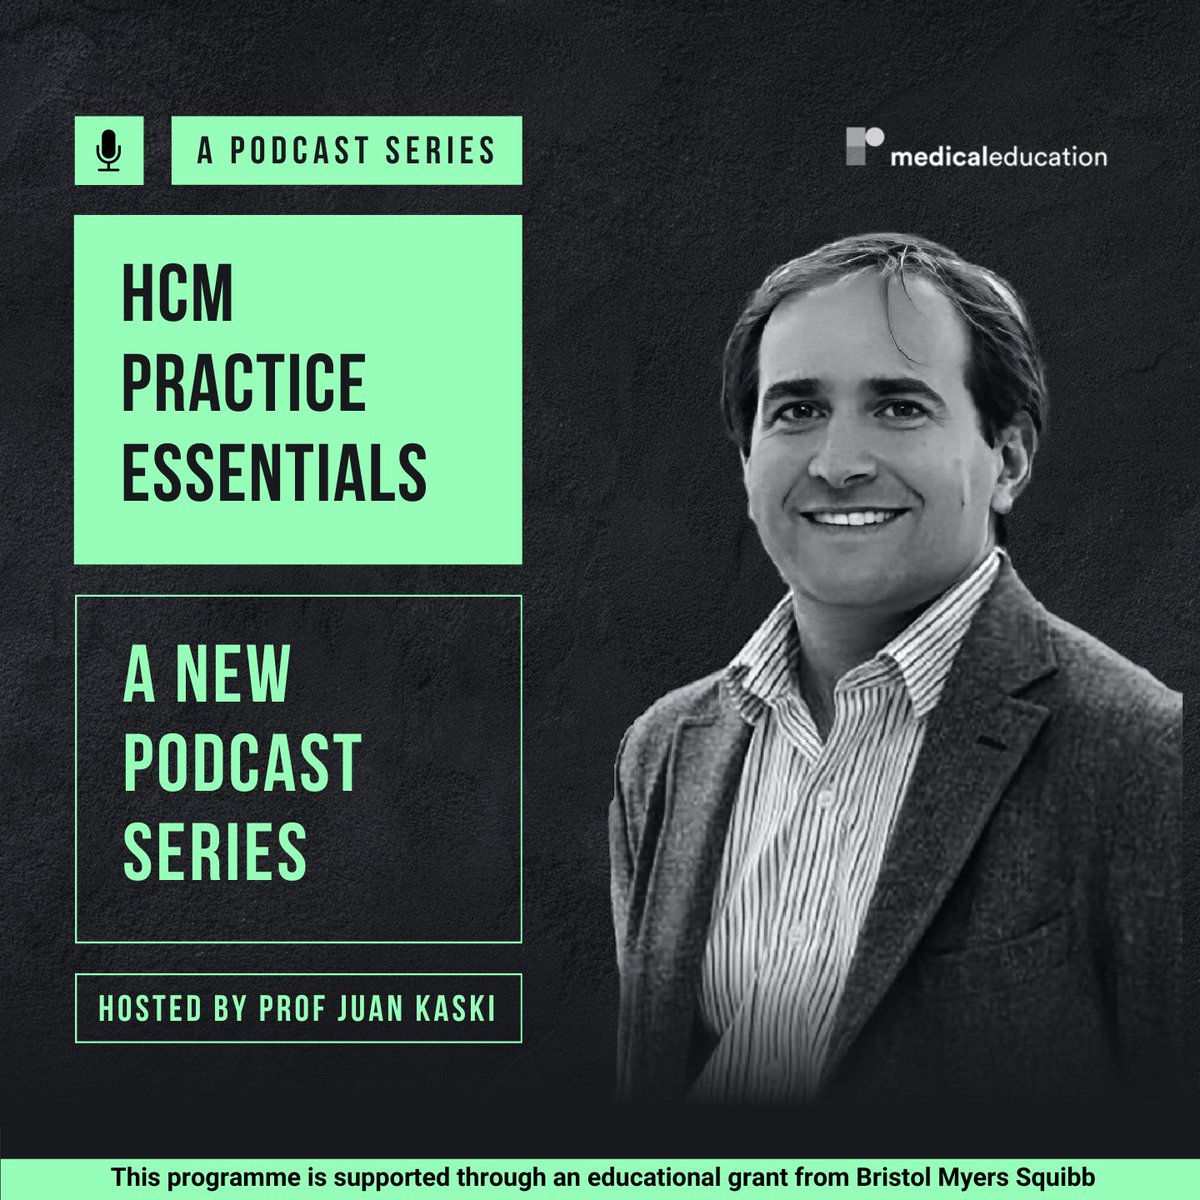 🎙️Introducing our new podcast series 'Hypertrophic Cardiomyopathy Practice Essentials'! 🌟 Get ready to explore evidence-based strategies for managing #HCM with Prof @jpkaski and special guests. Don't miss out on practical advice from top experts to enhance your clinical…